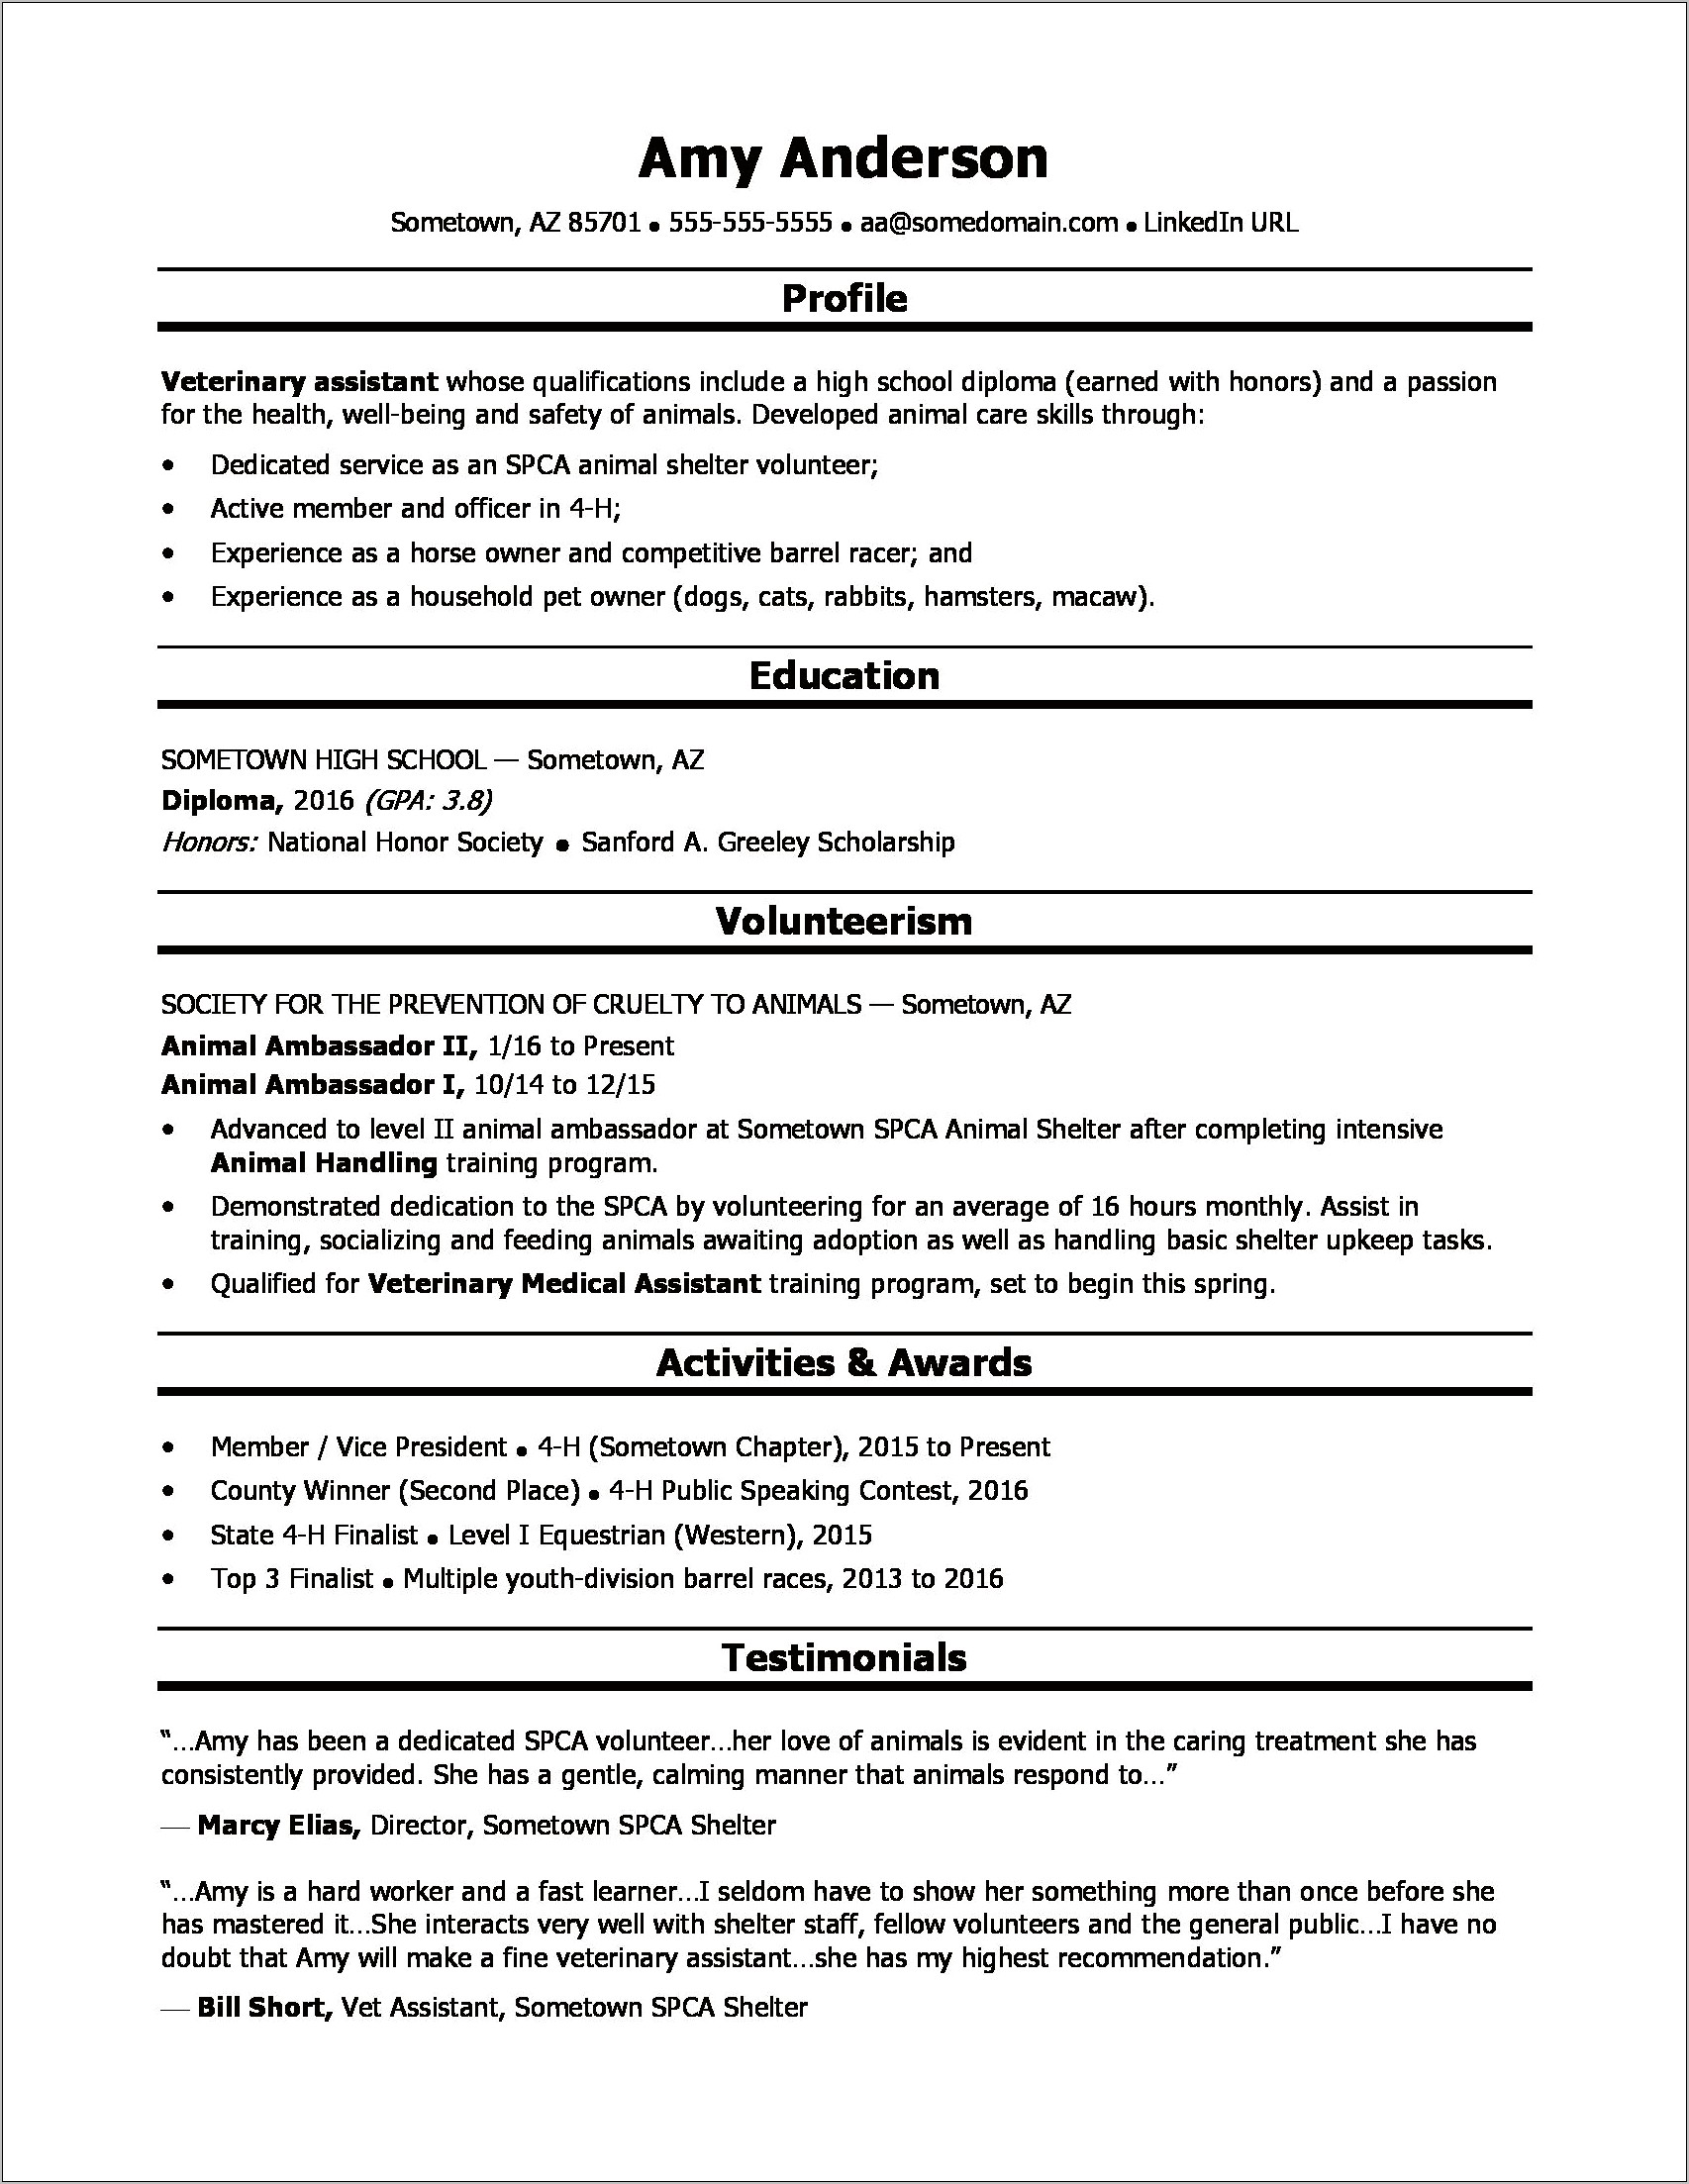 Personal Statement Example For Resume High School Students